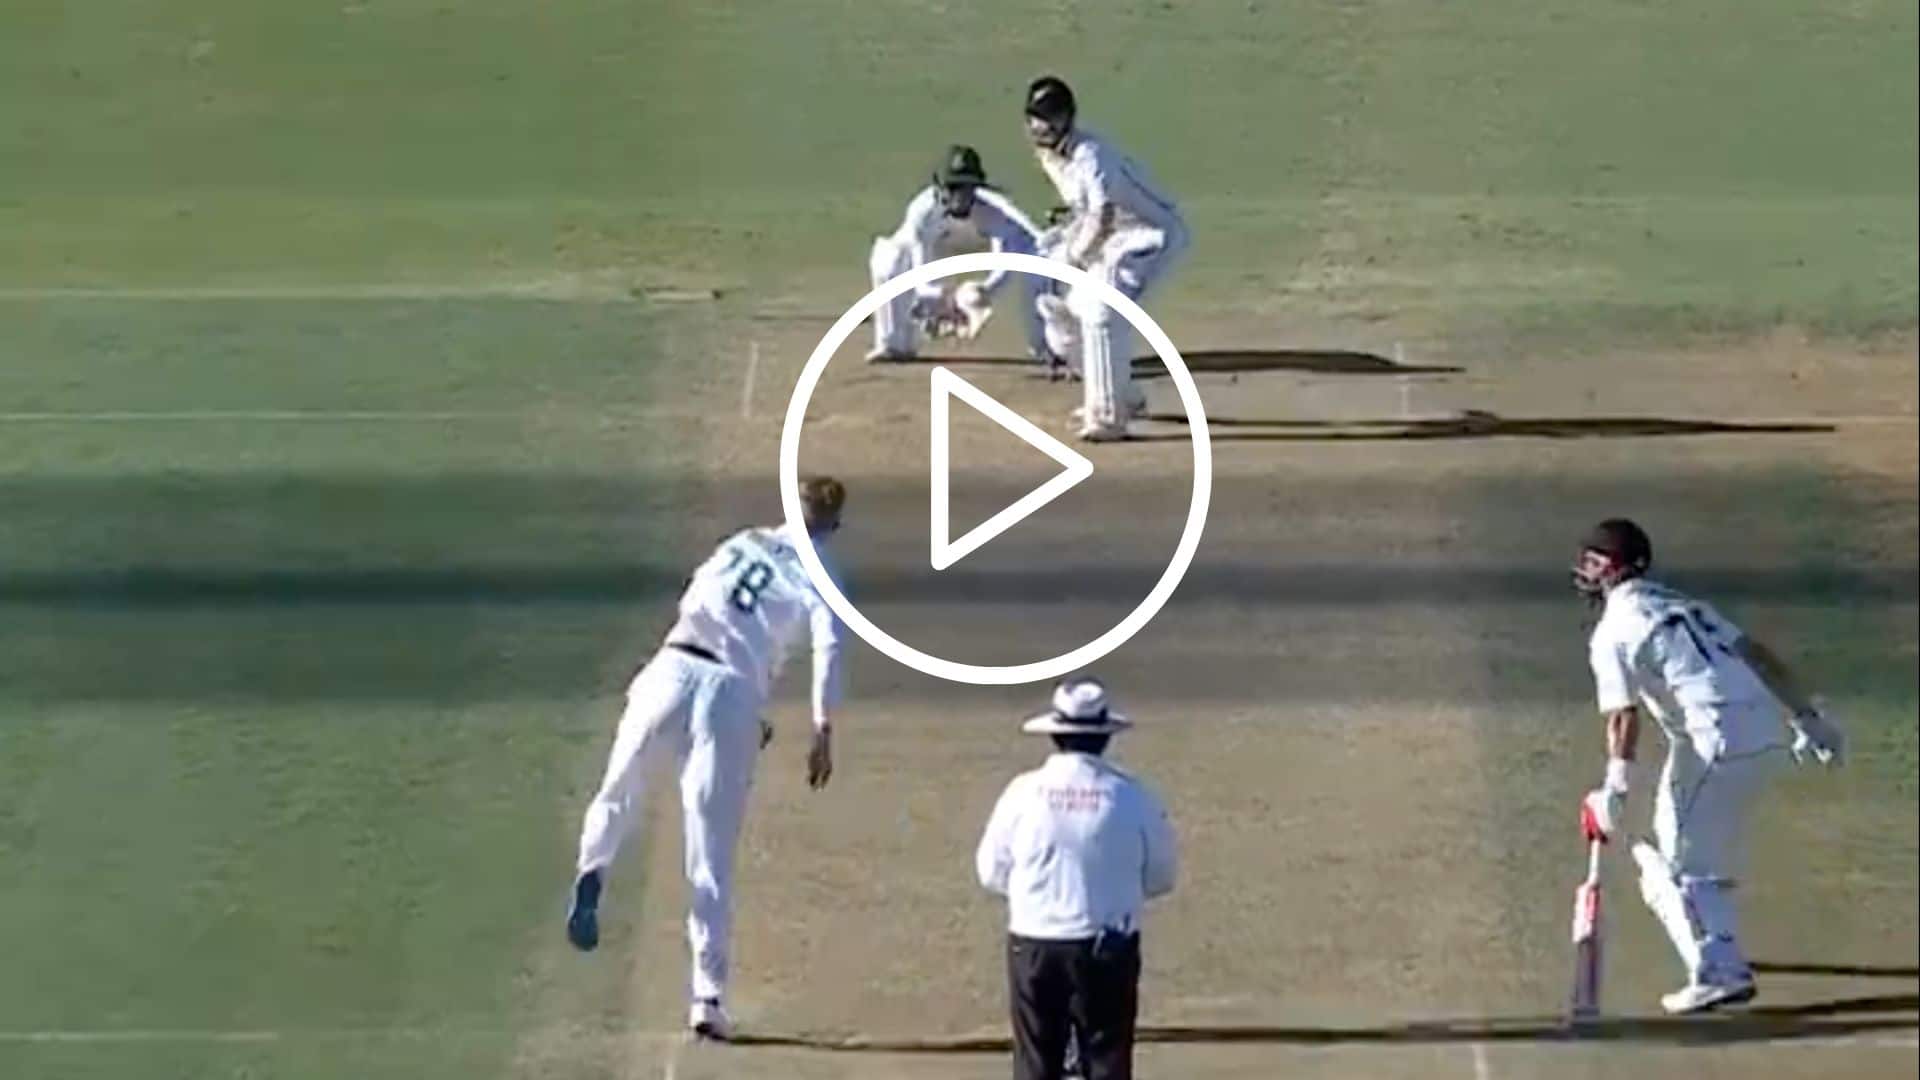 [Watch] Kane Williamson Creates History With Centuries In Both Innings Of Test Match vs SA